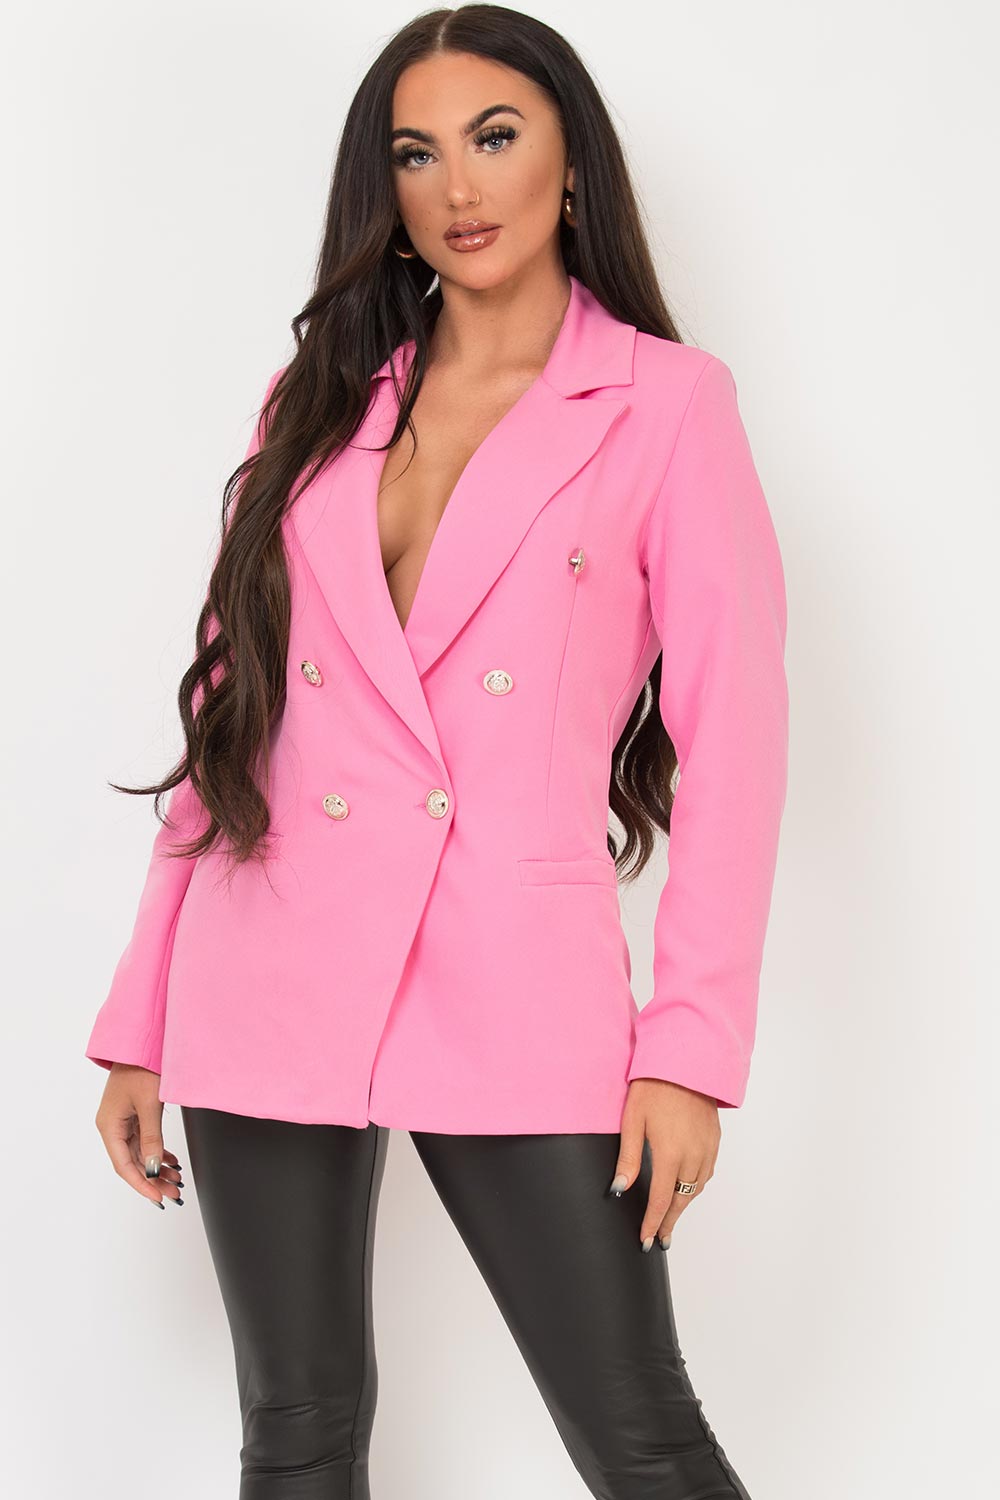 pink blazer with gold buttons womens